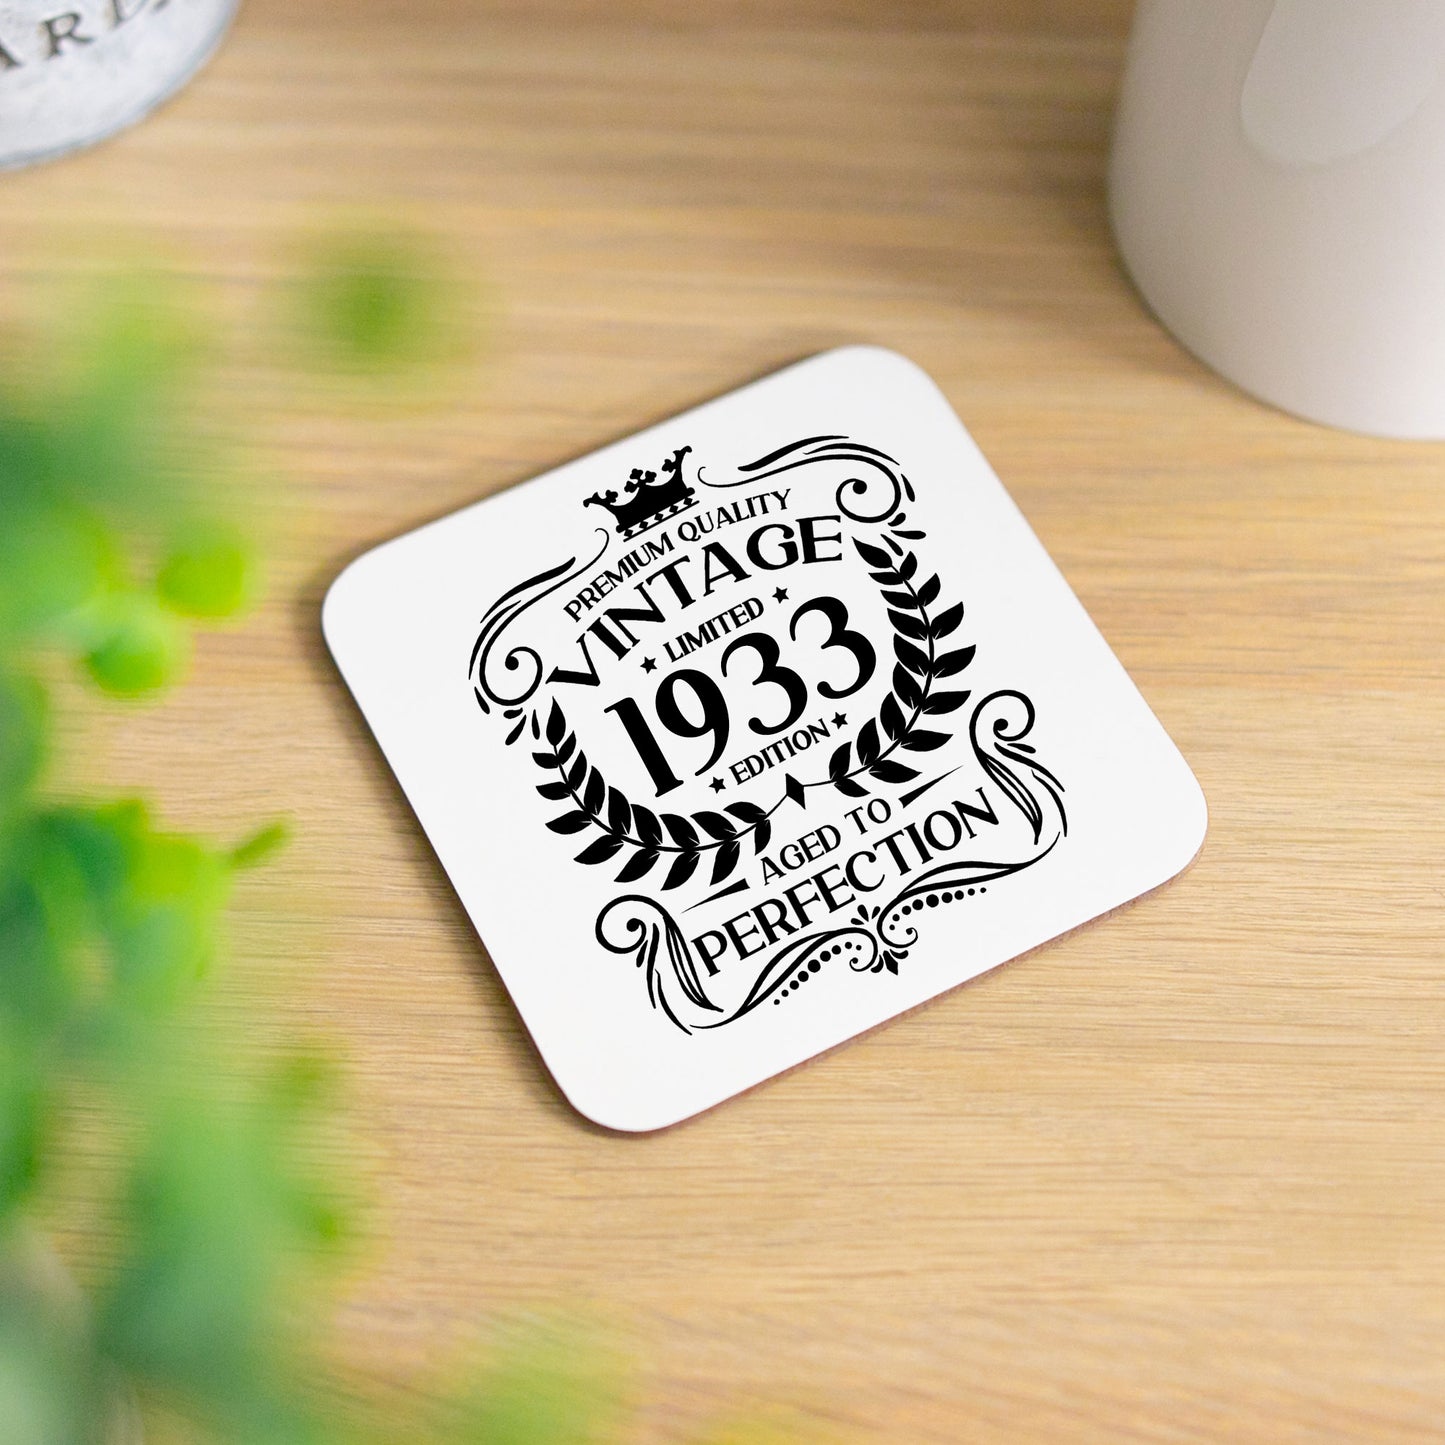 Vintage 1933 90th Birthday Engraved Gin Glass Gift  - Always Looking Good - Glass & Printed Coaster  